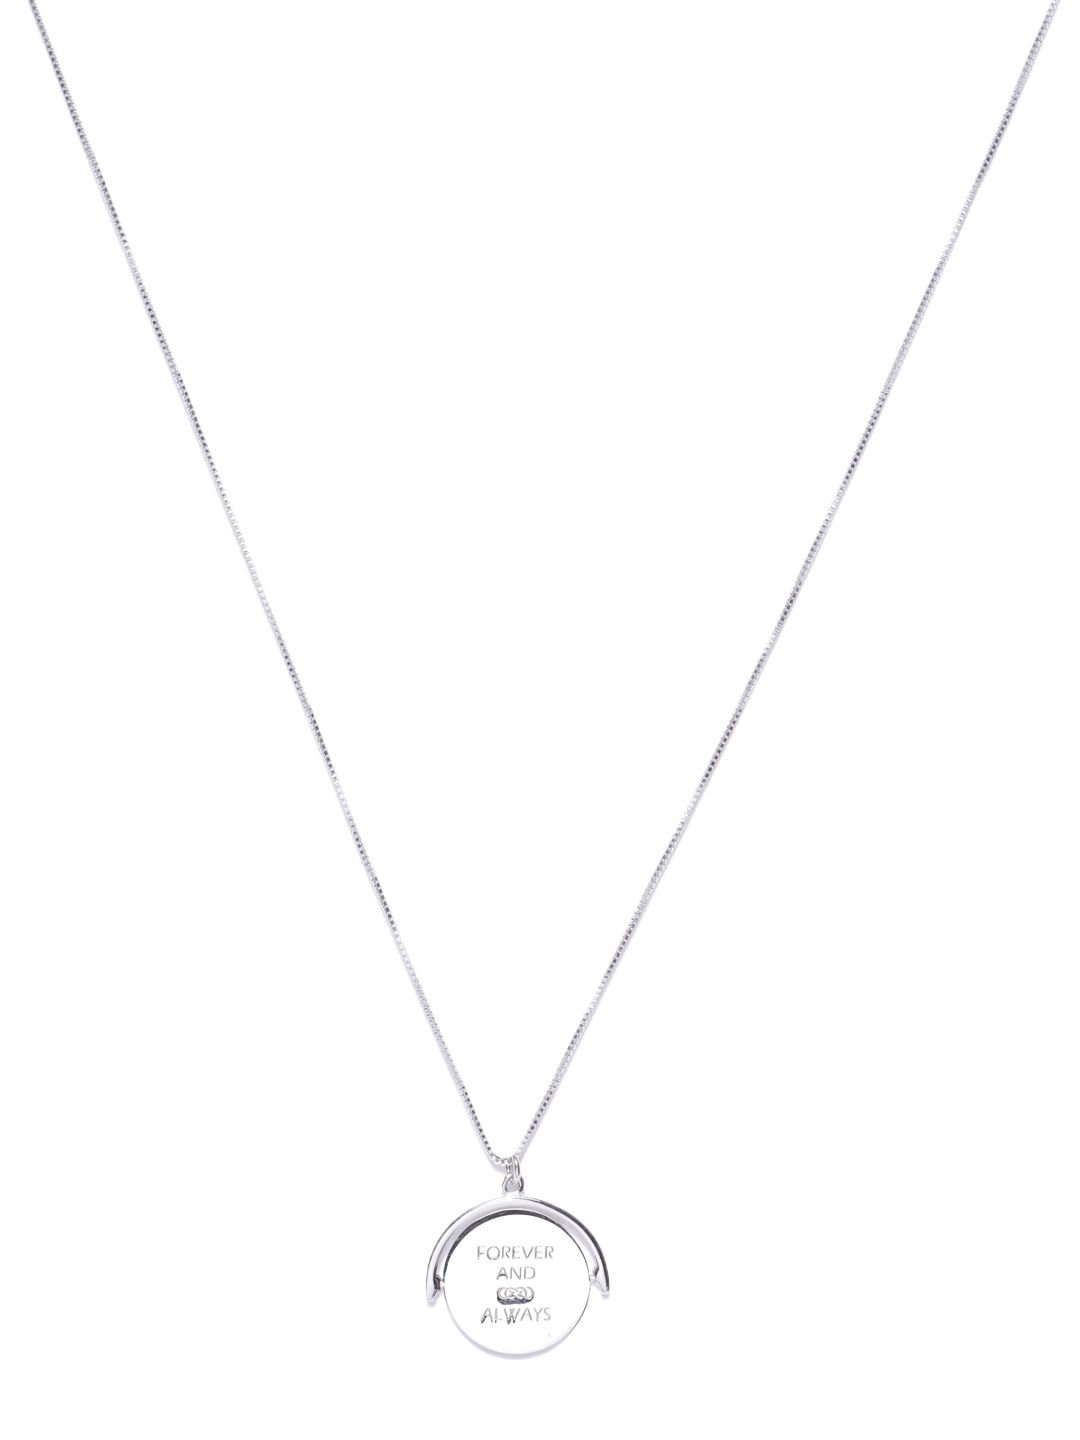 Carlton London 925 Sterling Silver-Silver-Toned Rhodium-Plated Necklace Price in India